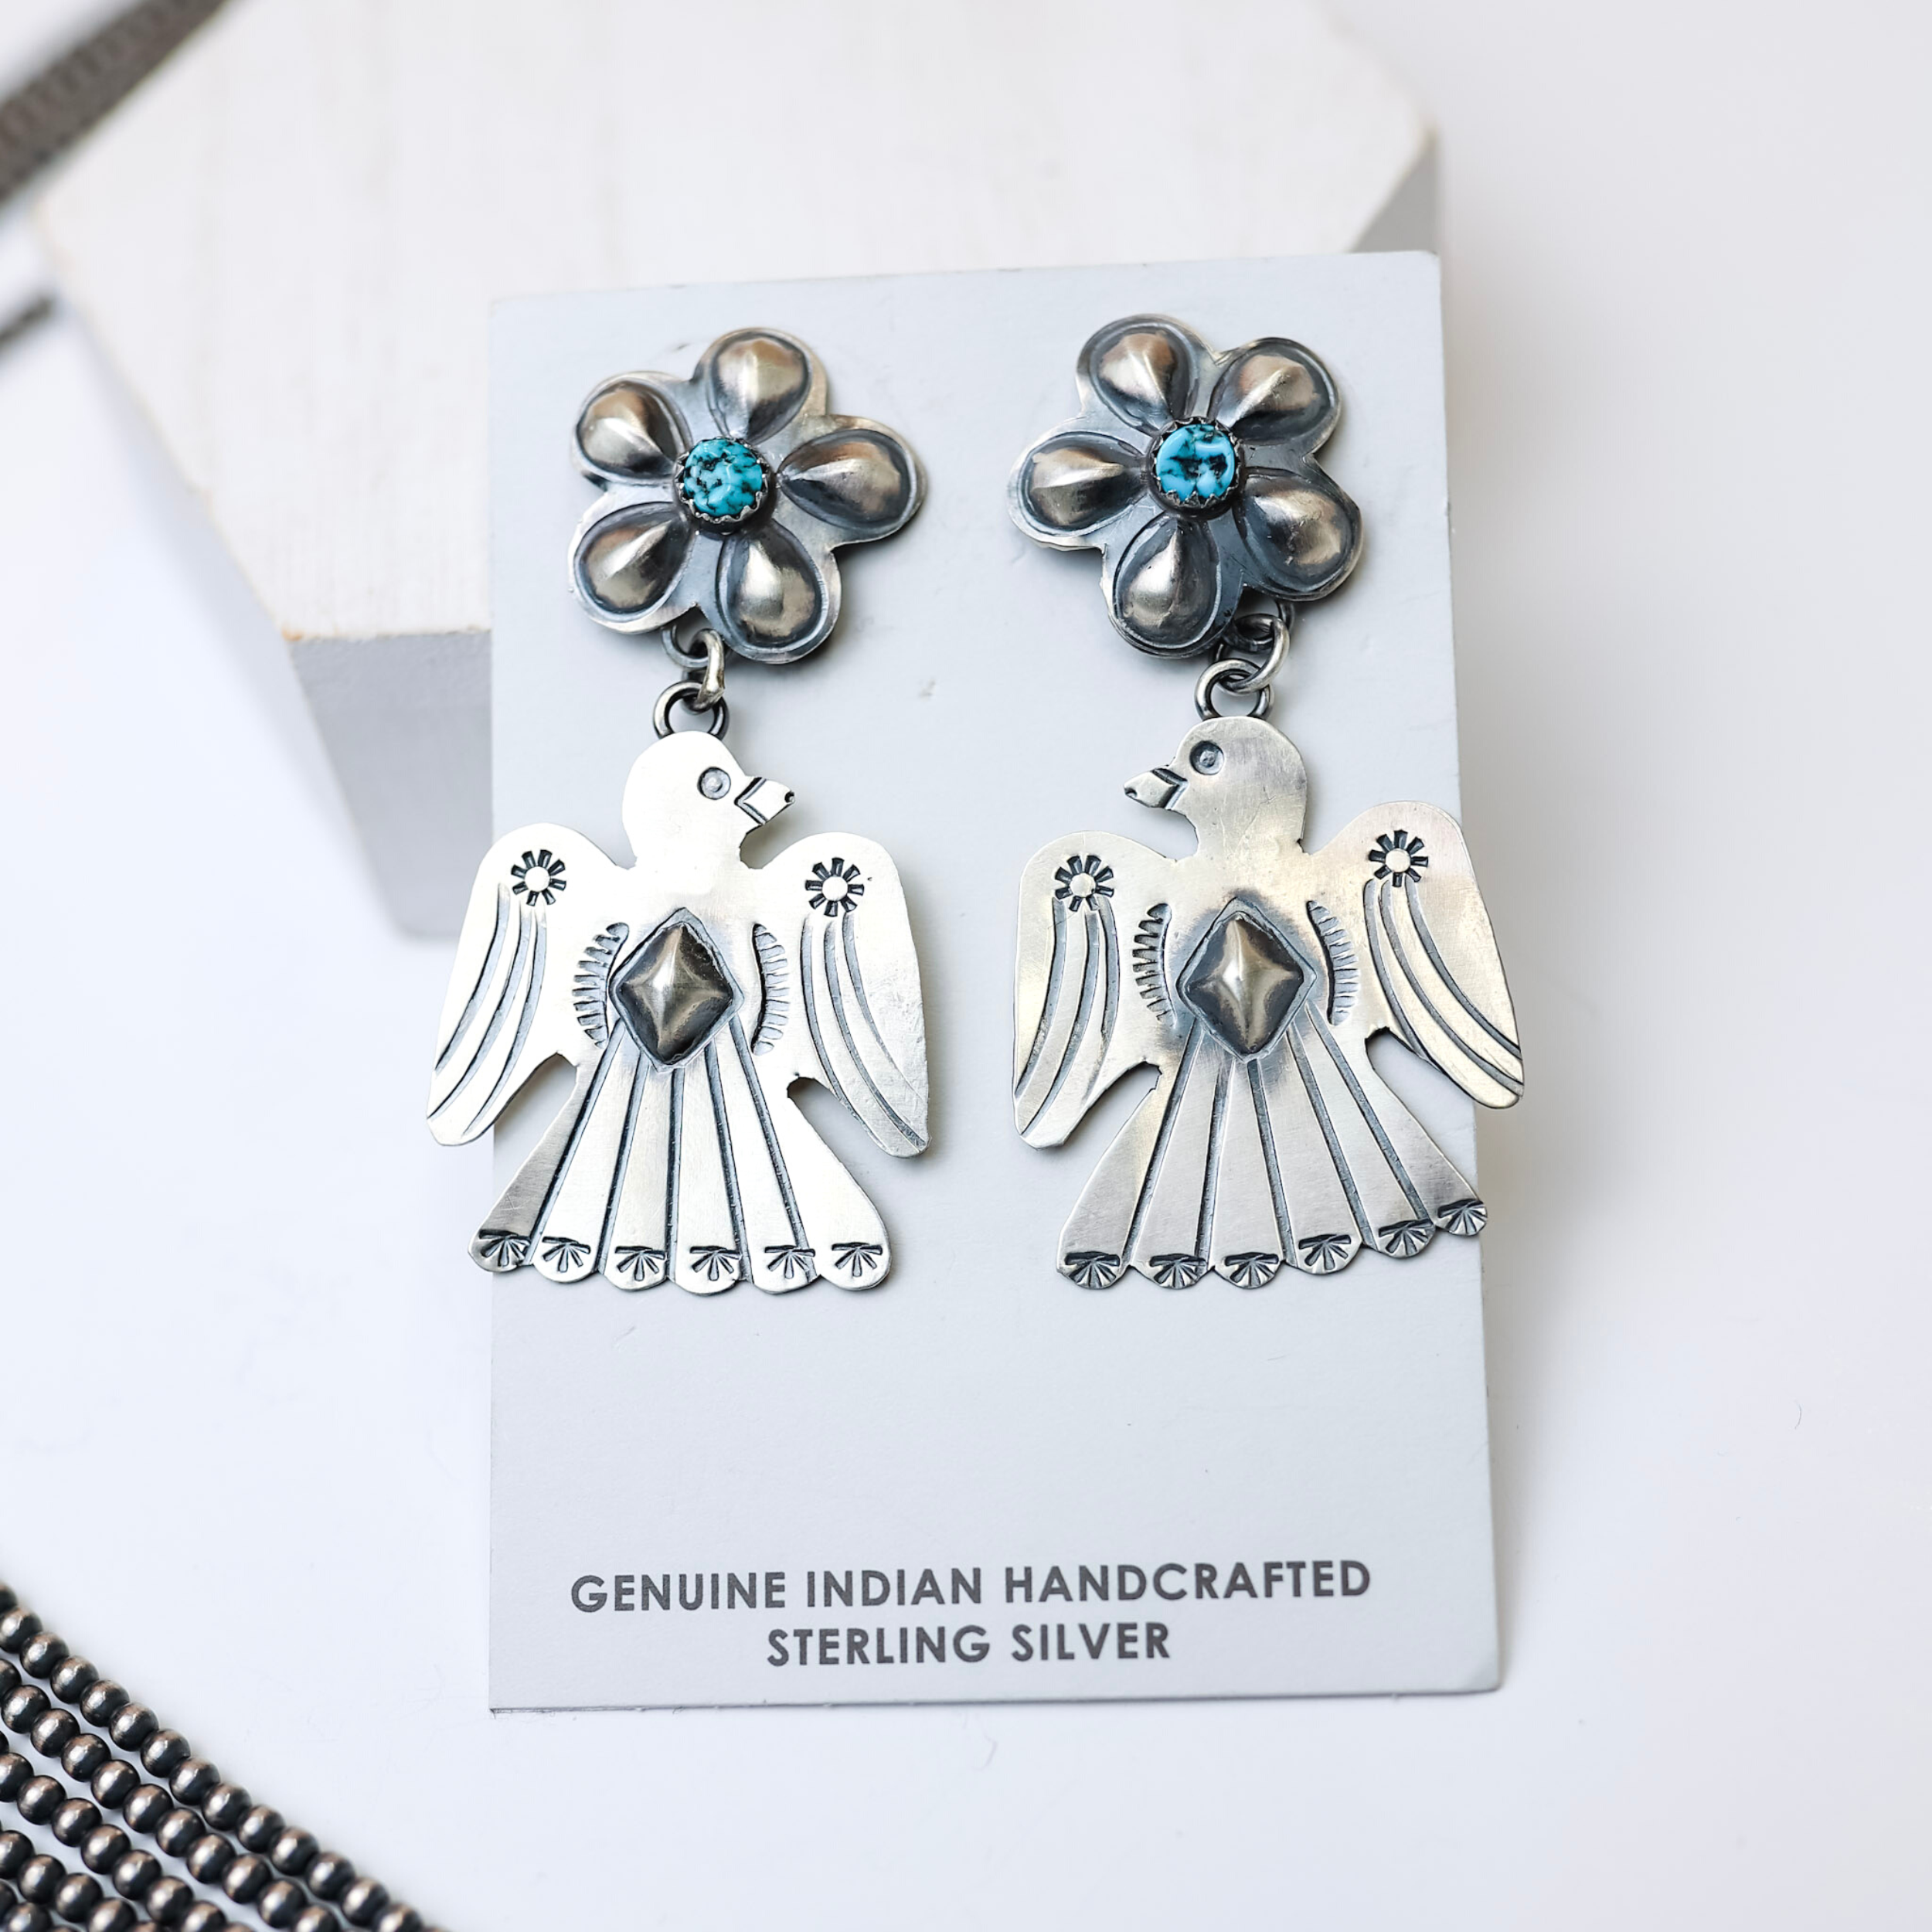 Tim Yazzie Navajo Handmade Sterling Silver Flower Post Thunderbird Drop Earrings with Turquoise Stones are centered in the middle of the picture with navajo pearls to the left of the earrings. All on a white background. 